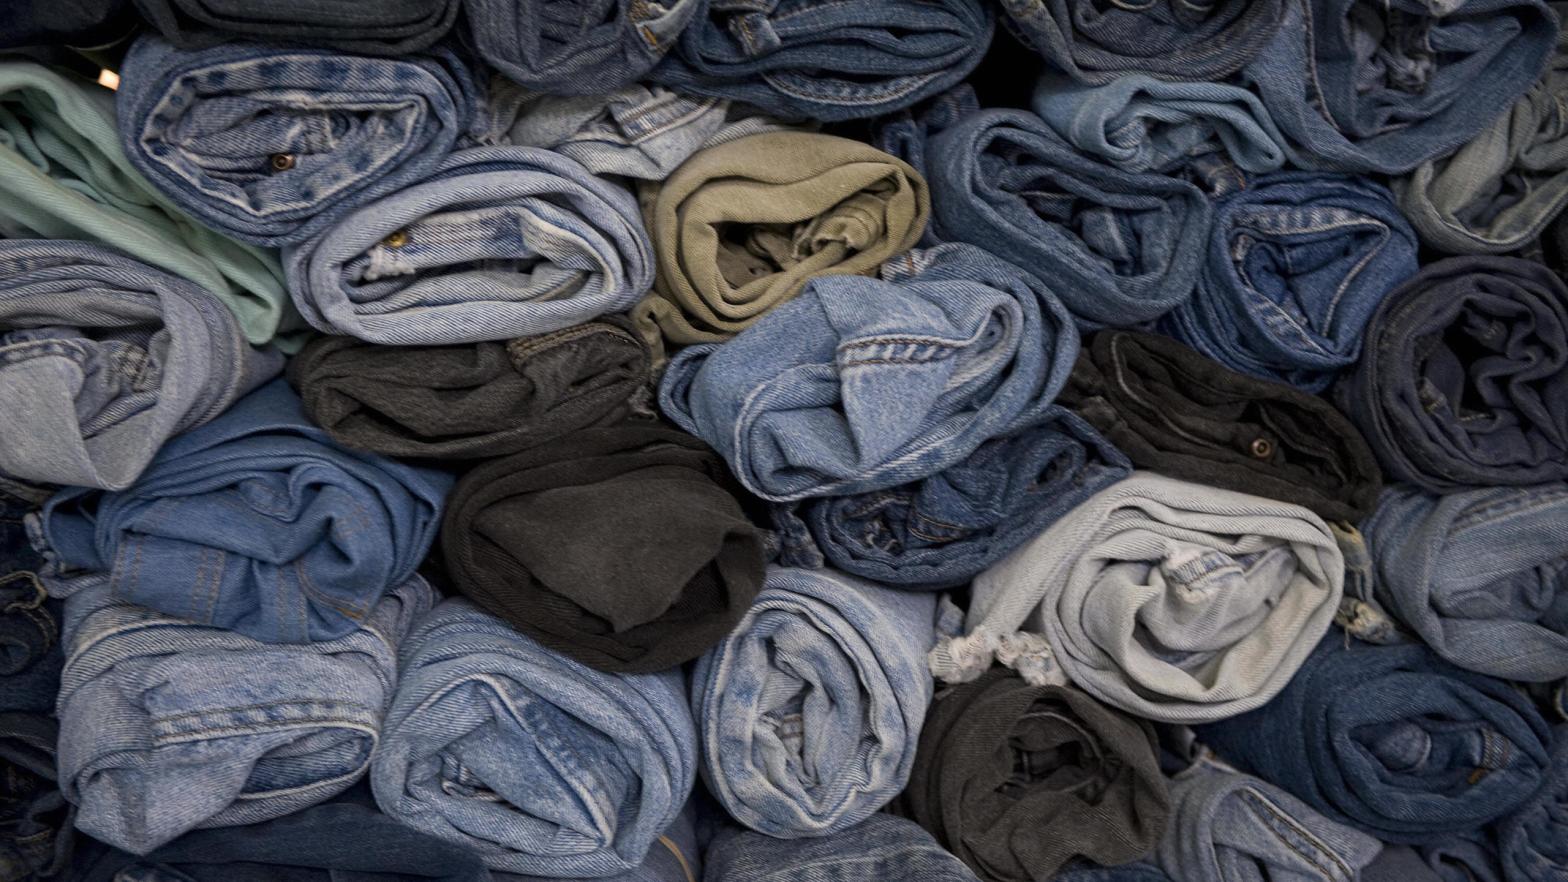 Turns out the Sisterhood of the Travelling Pants was really about pollution. (Photo: Jim Watson/AFP, Getty Images)